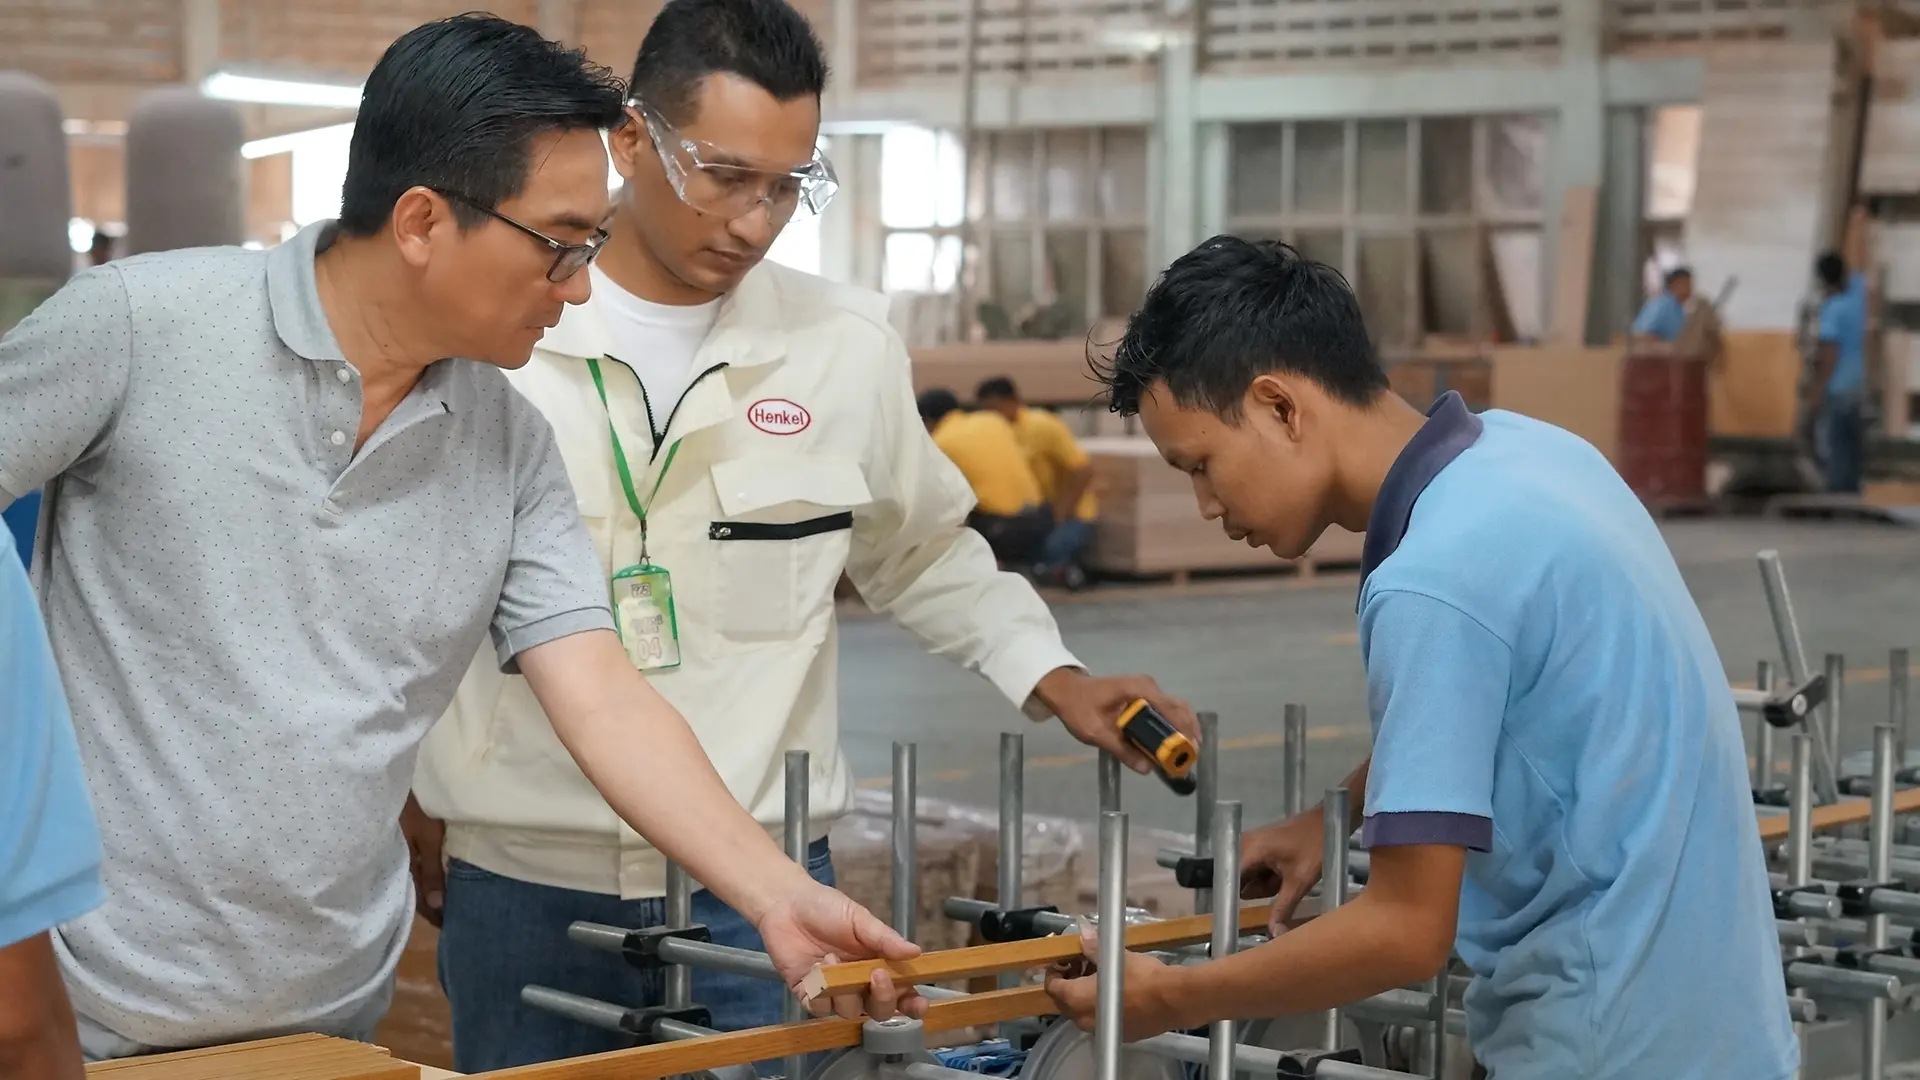 Mr. Ch’ng (left) with Henkel’s expert (middle), doing quality inspection in YBWWI’s plant.